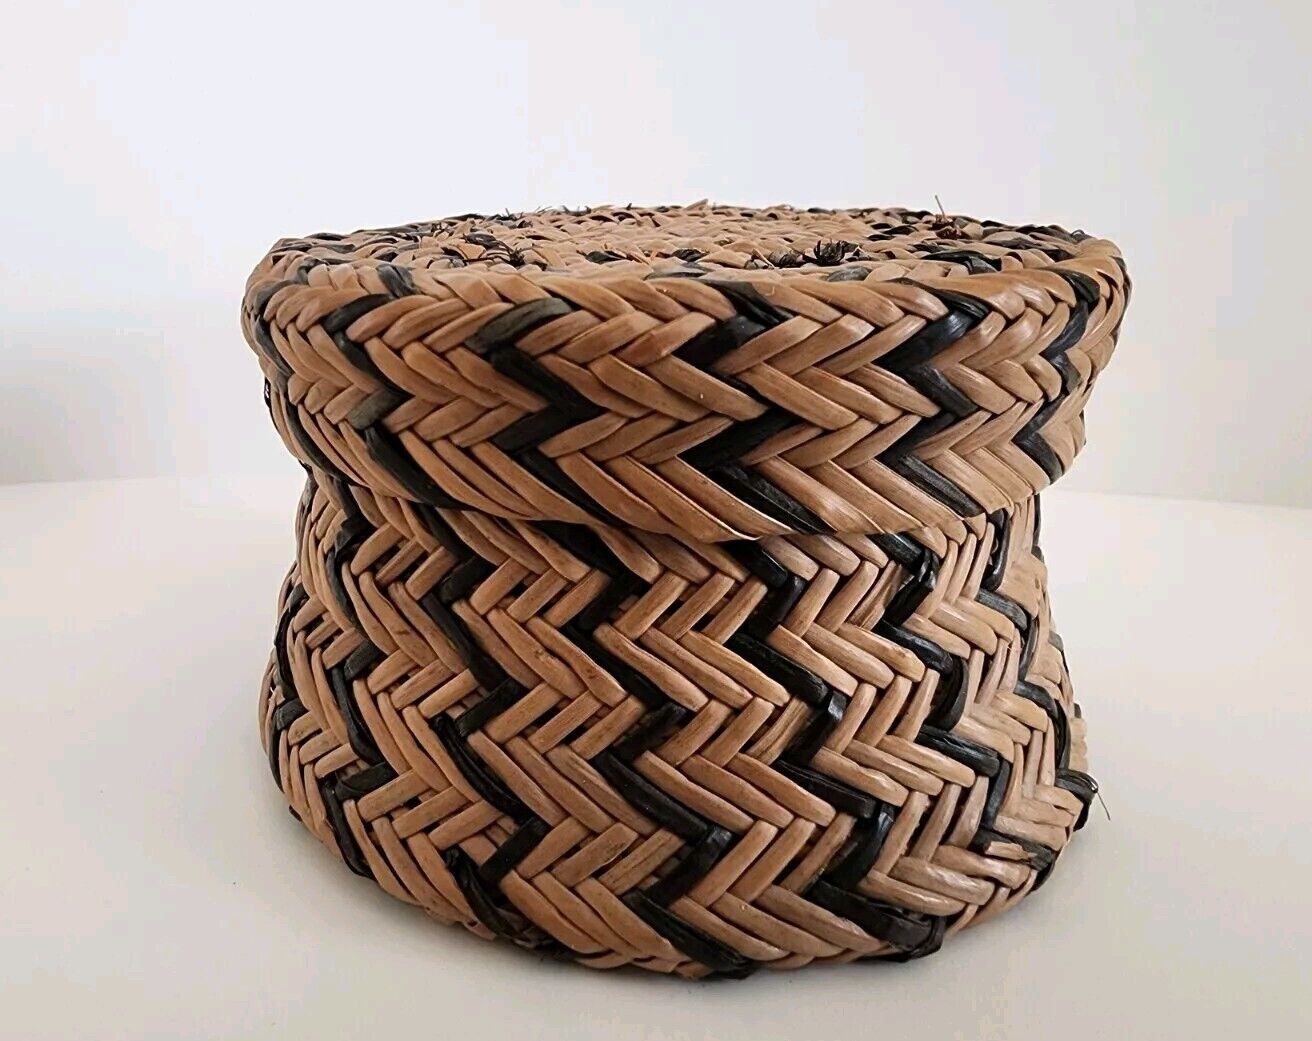  Woven Basket with Cover, Vintage